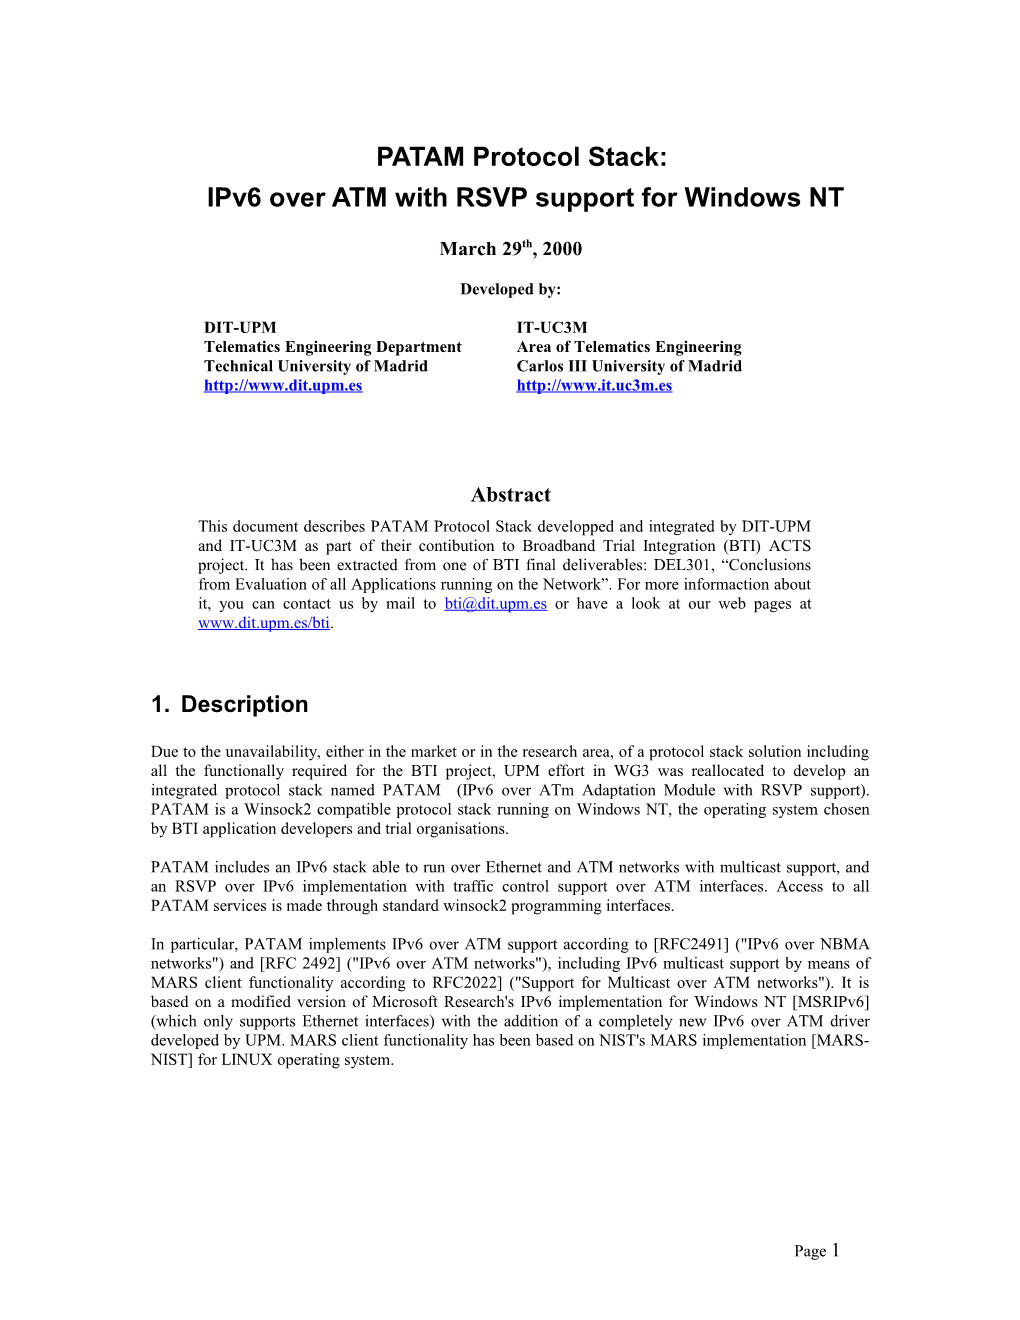 Ipv6 Over ATM with RSVP Support for Windows NT